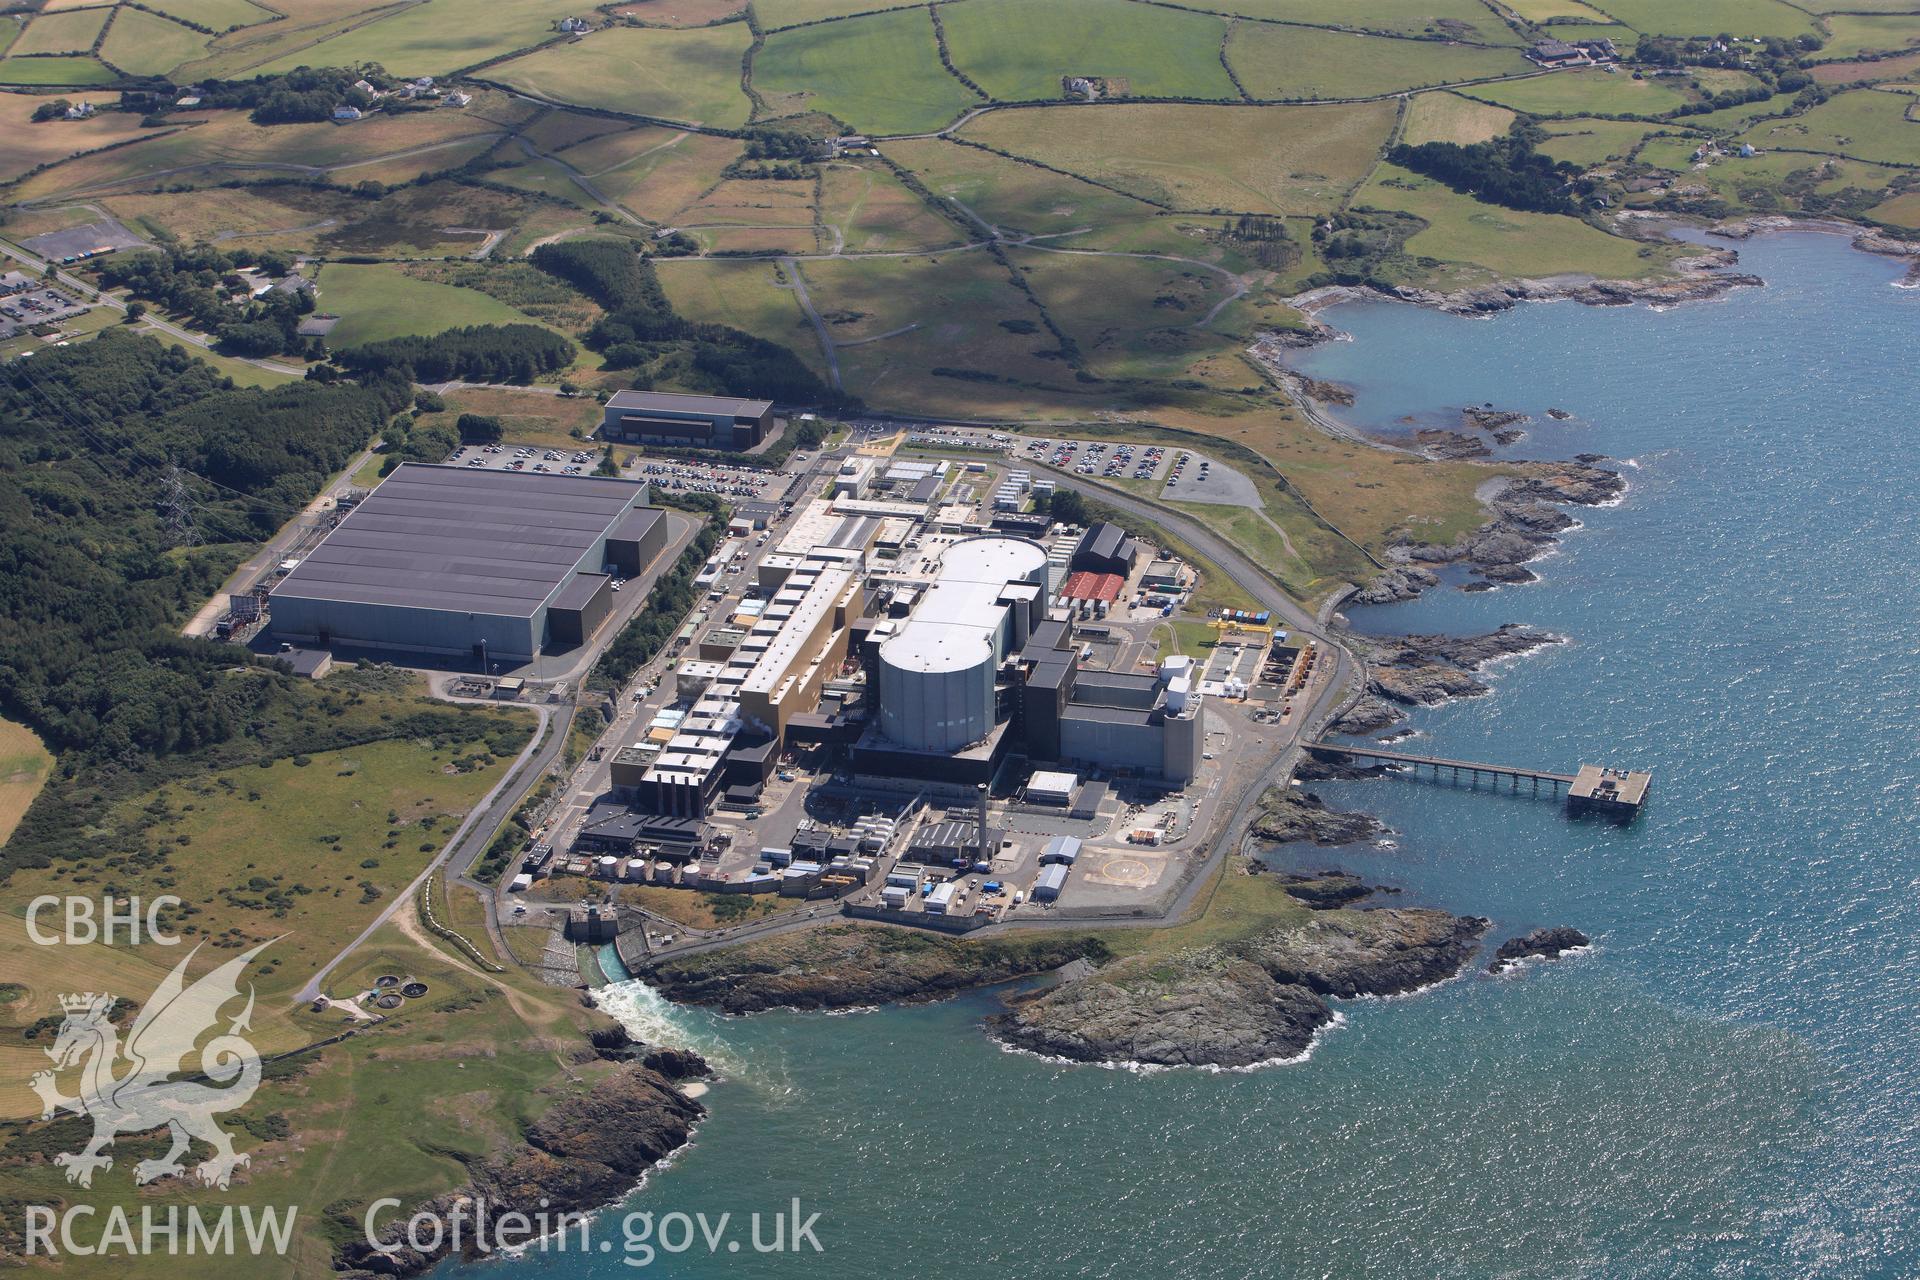 RCAHMW colour oblique photograph of Wylfa Nuclear Power Station. Taken by Toby Driver on 20/07/2011.